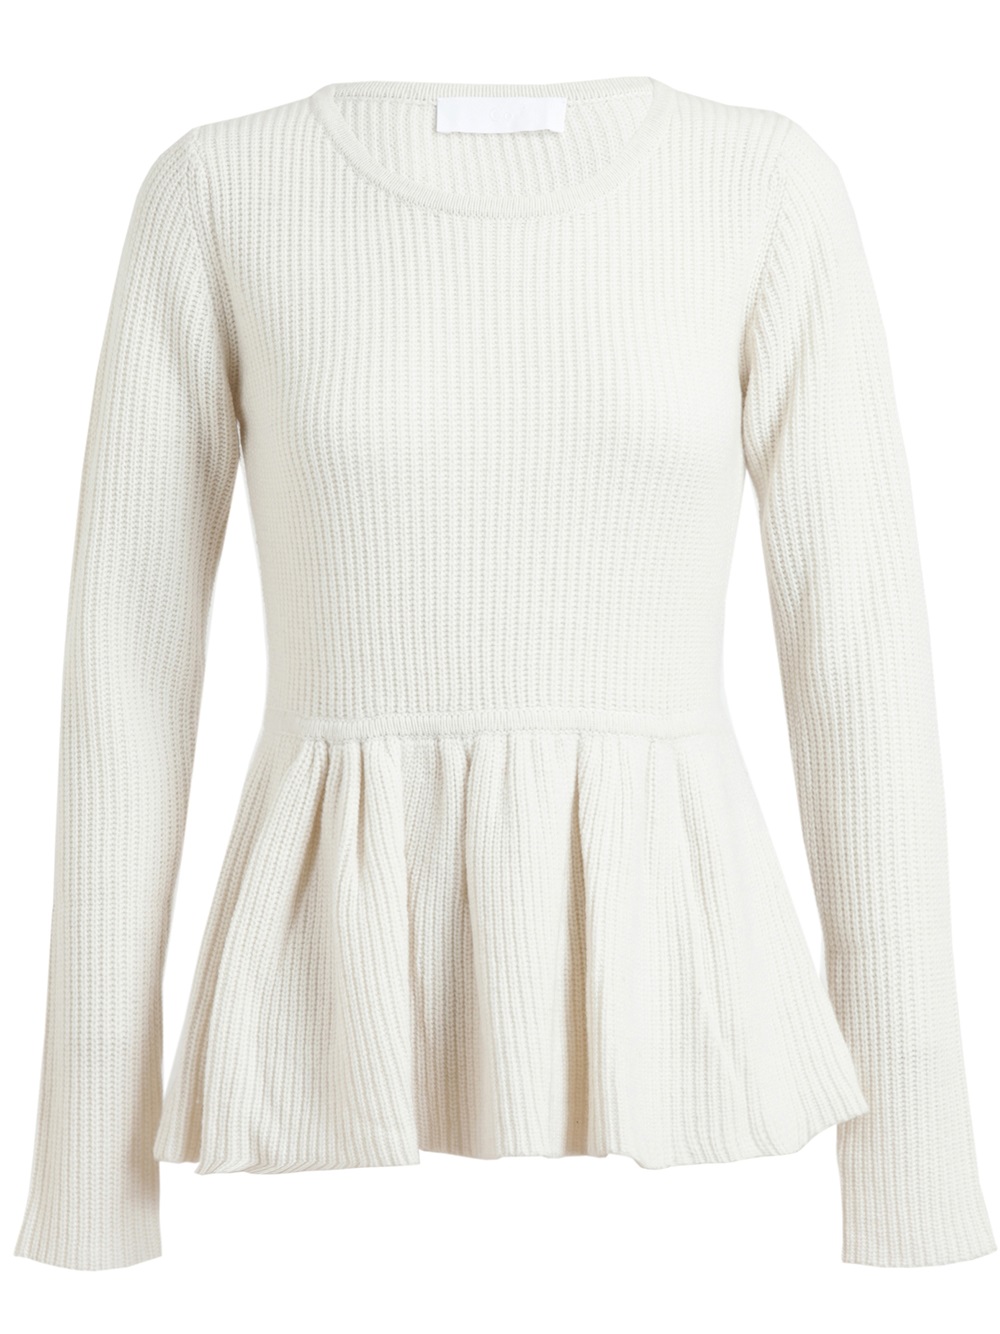 Lyst - Co. Ribbed Cashmere Peplum Knit in White